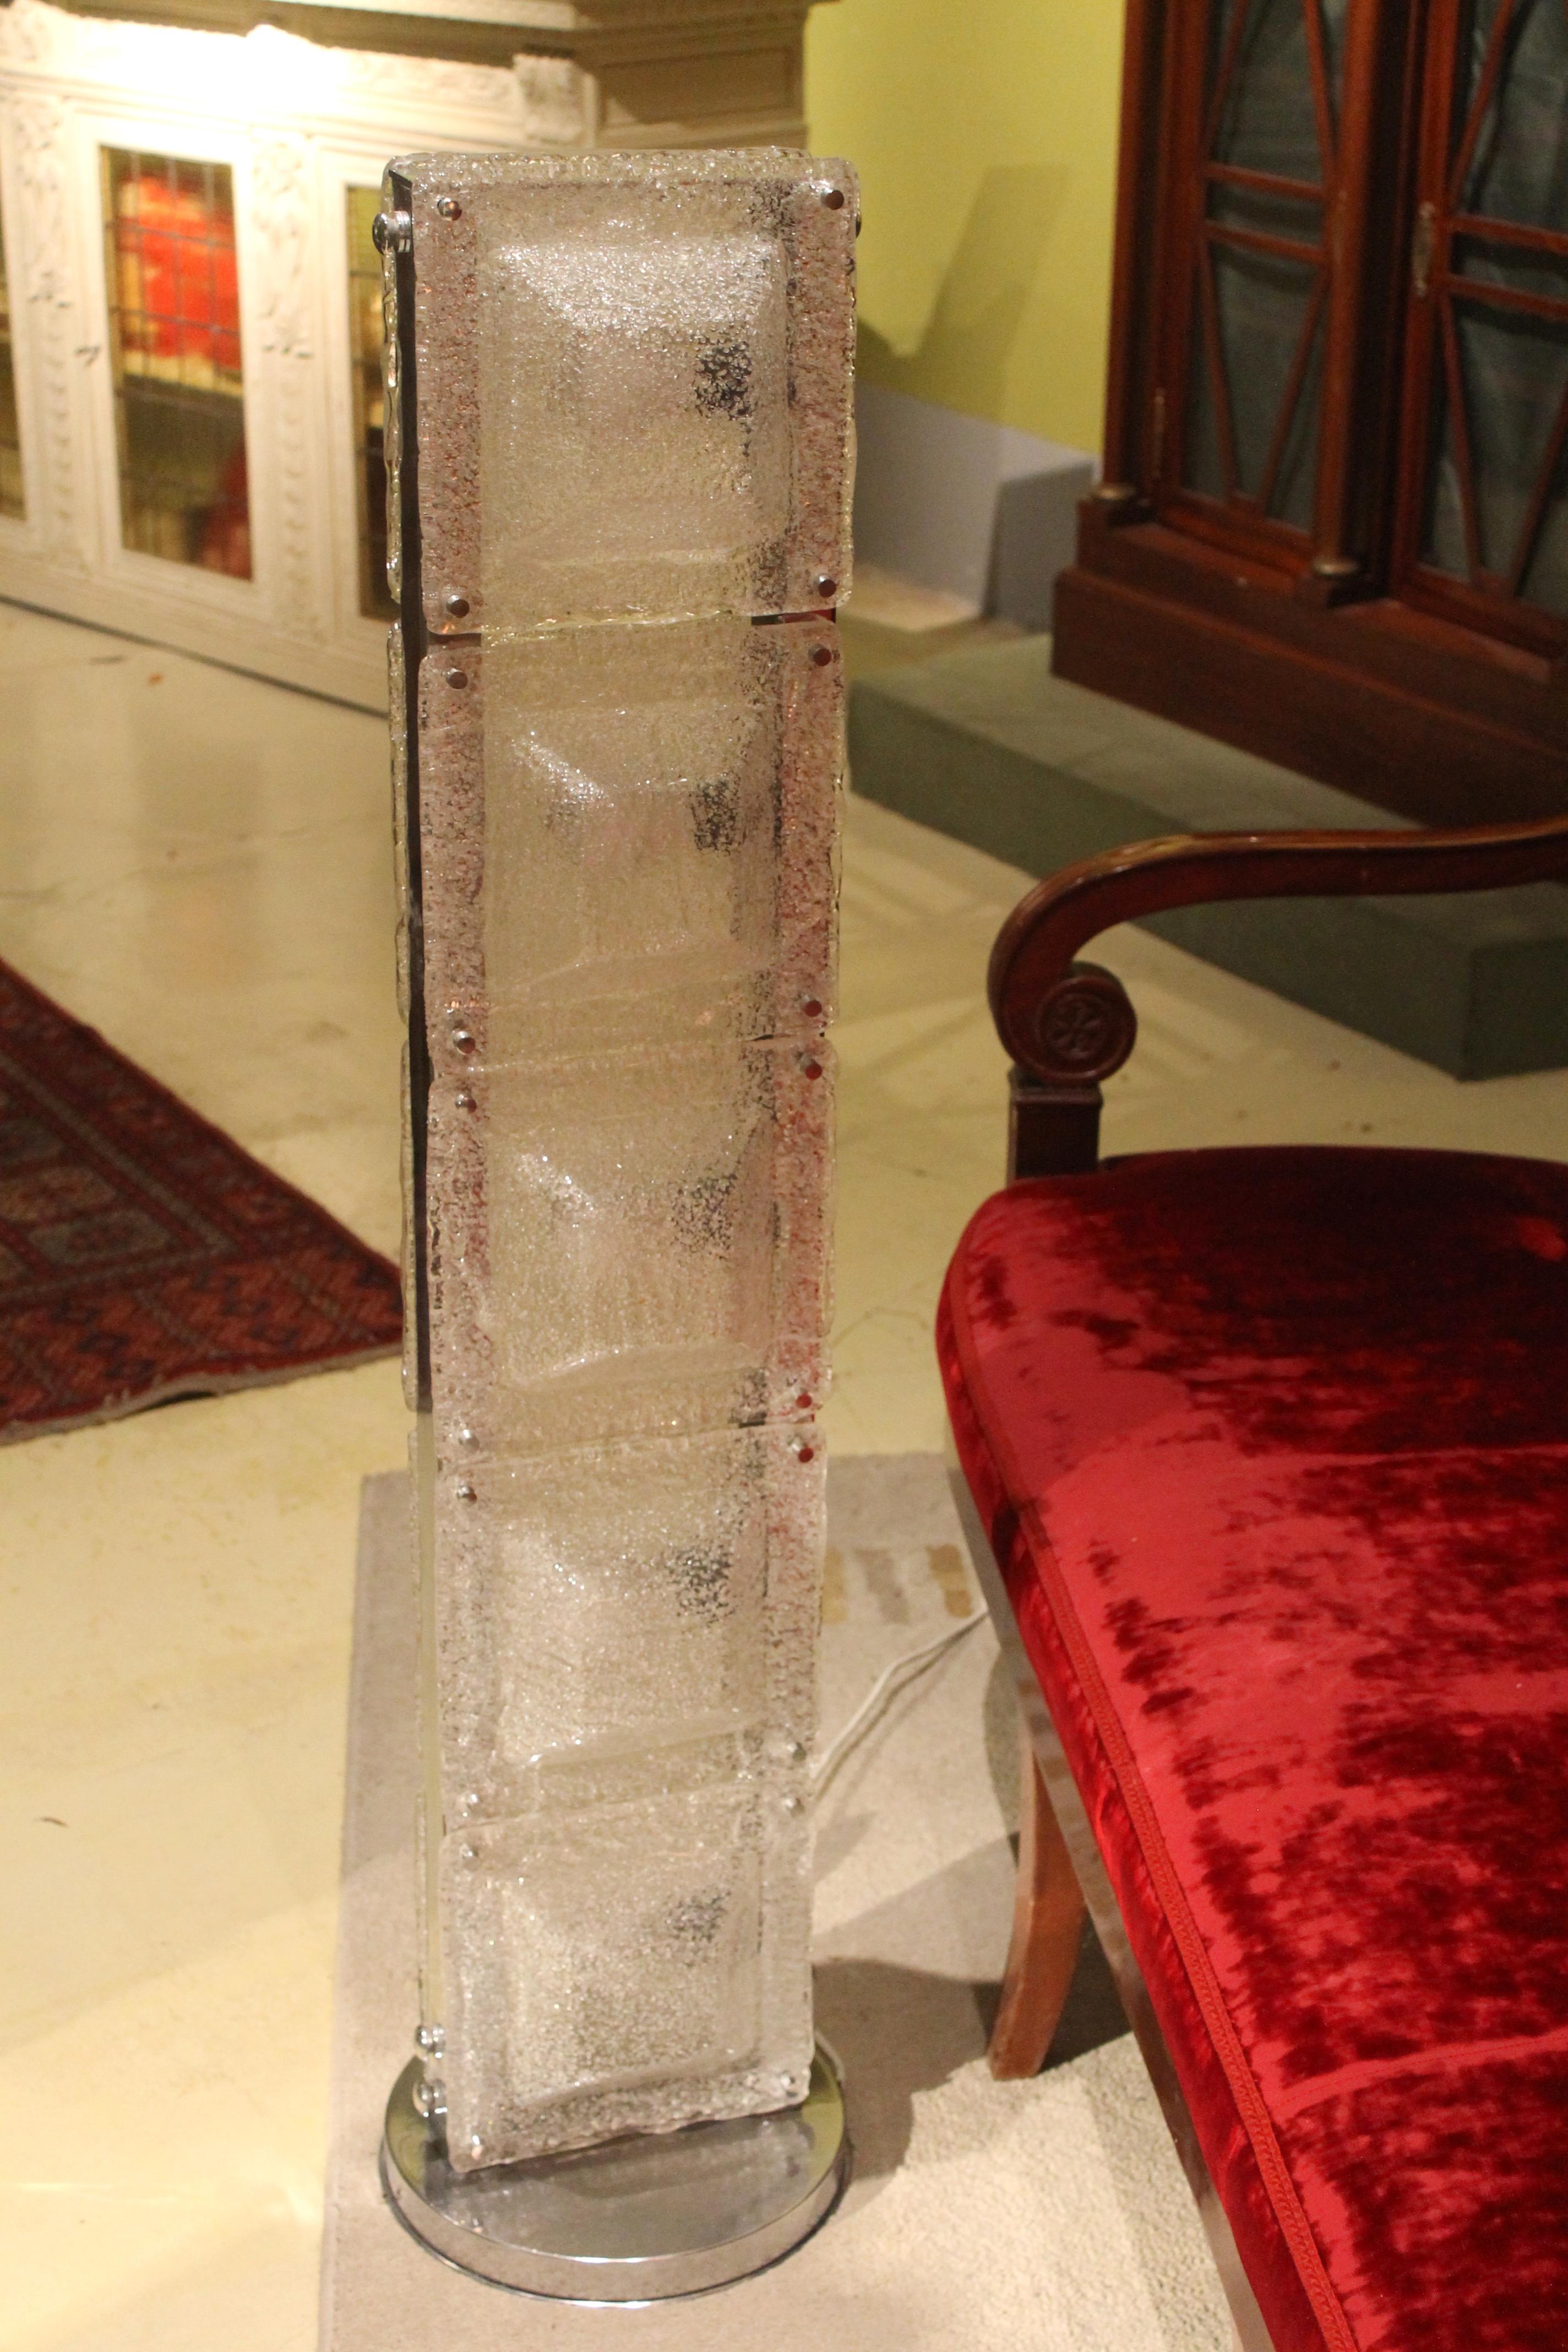 This gorgeous Italian Mid-Century Modern vintage TOTEM floor lamp made of transparent Murano mouth blown glass and silver chromed metal is attributable to Venetian Mazzega Manufacture.
Ten square-shaped panels of transparent Murano glass are